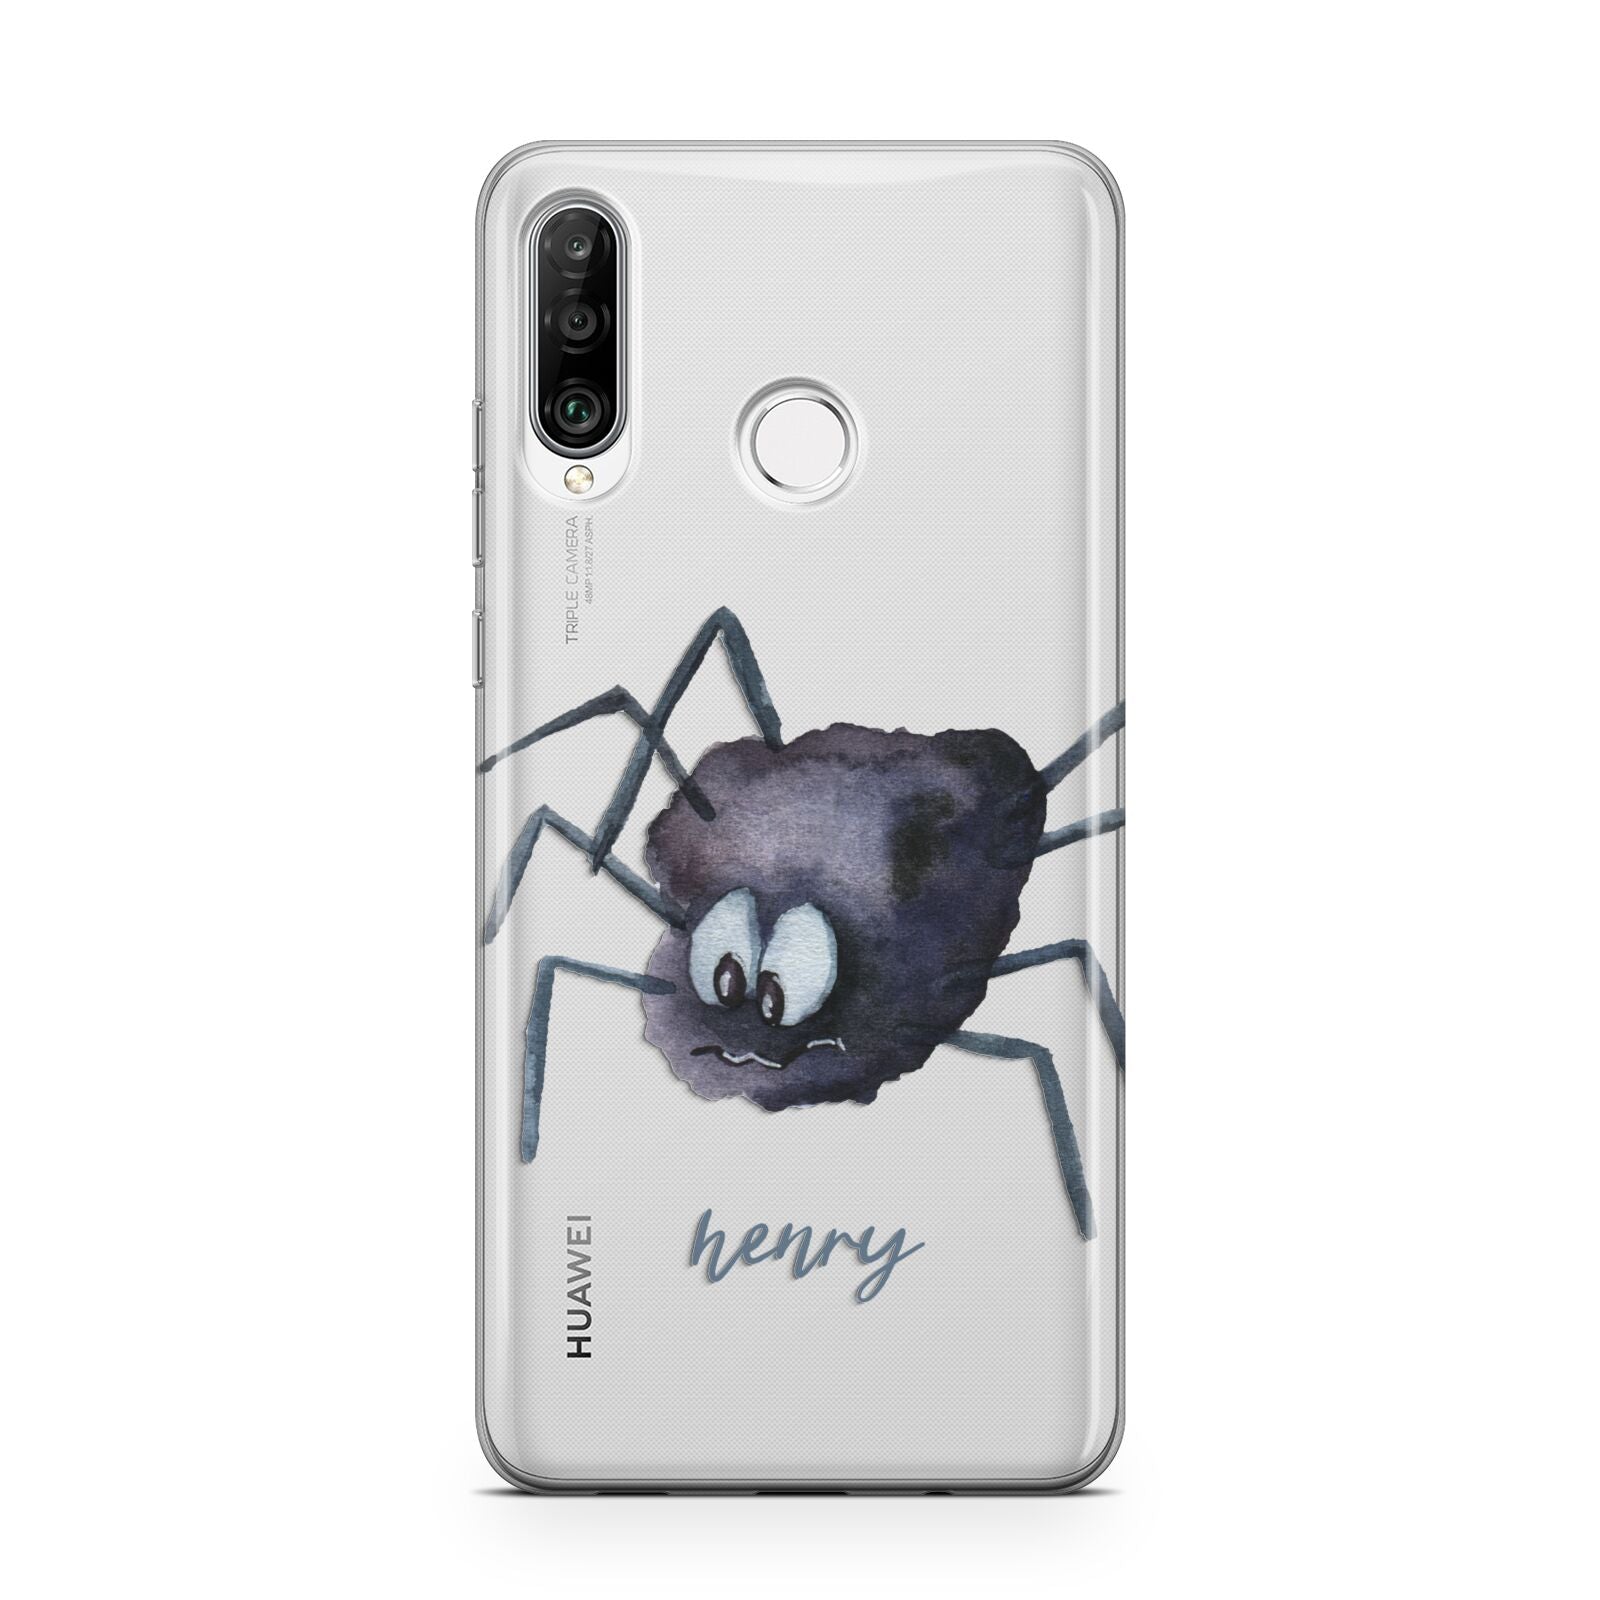 Scared Spider Personalised Huawei P30 Lite Phone Case